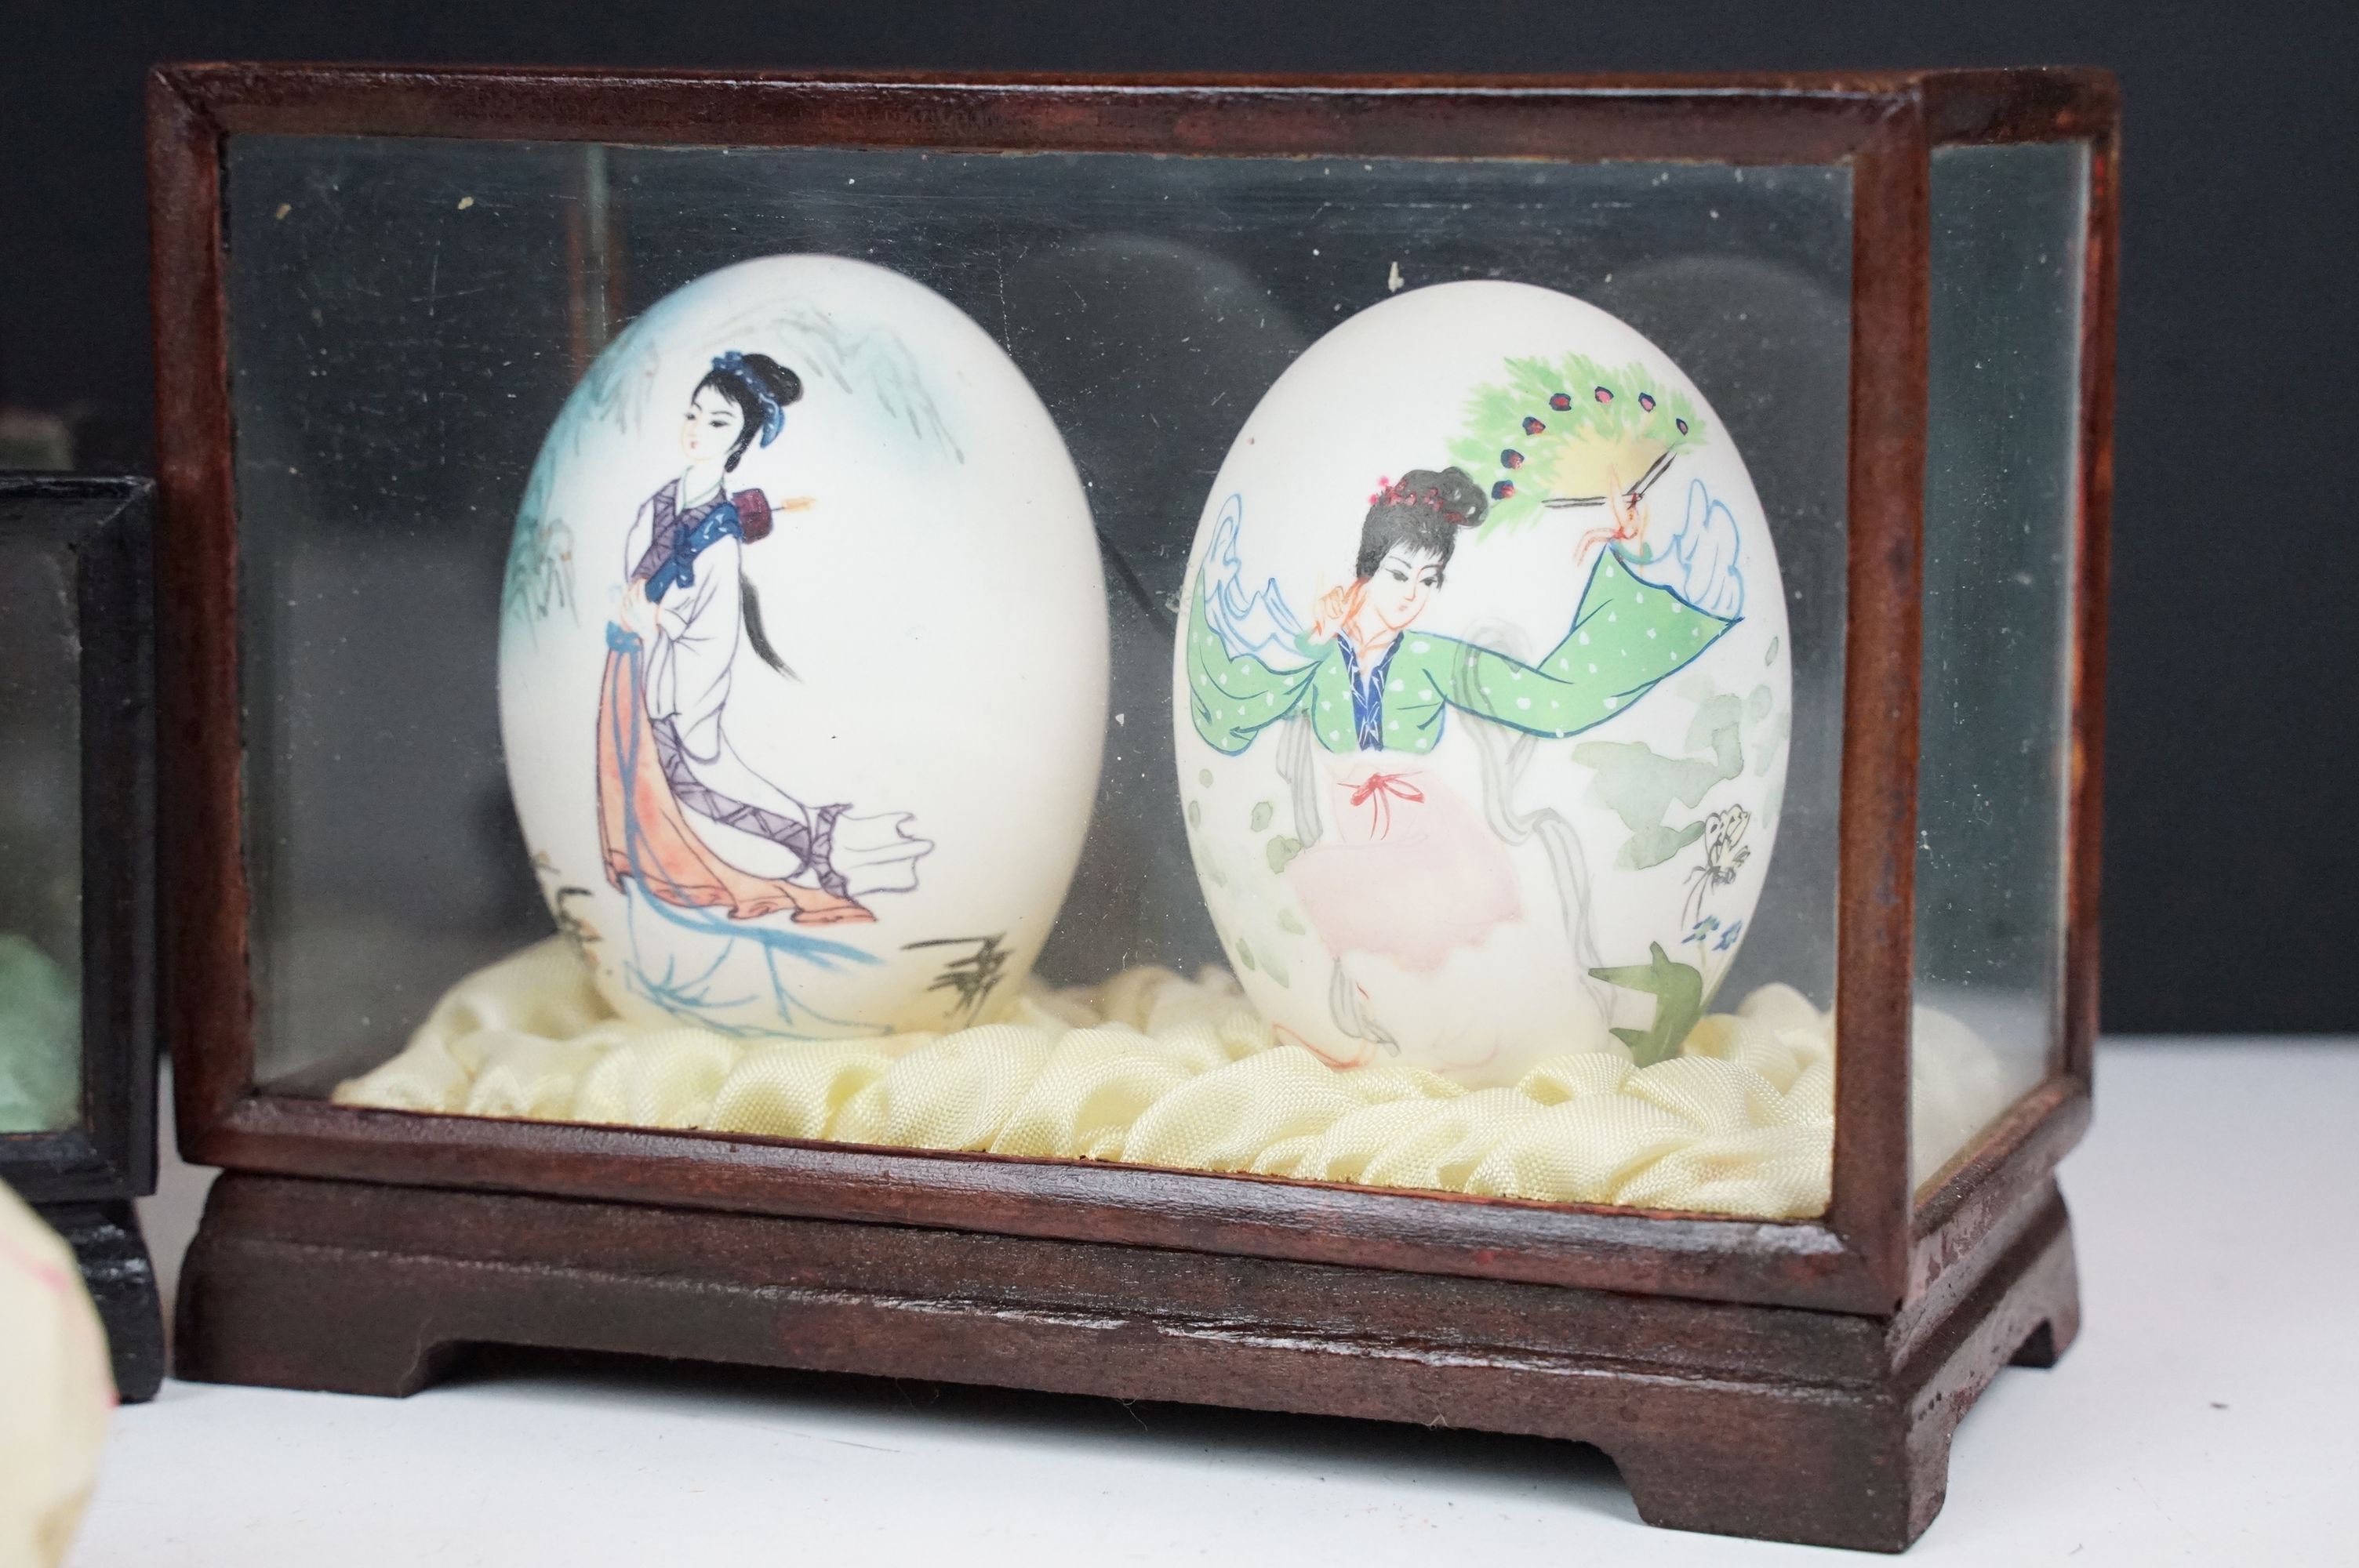 Collection of Chinese painted eggs including some in small display cases, and some ceramic examples. - Image 6 of 6